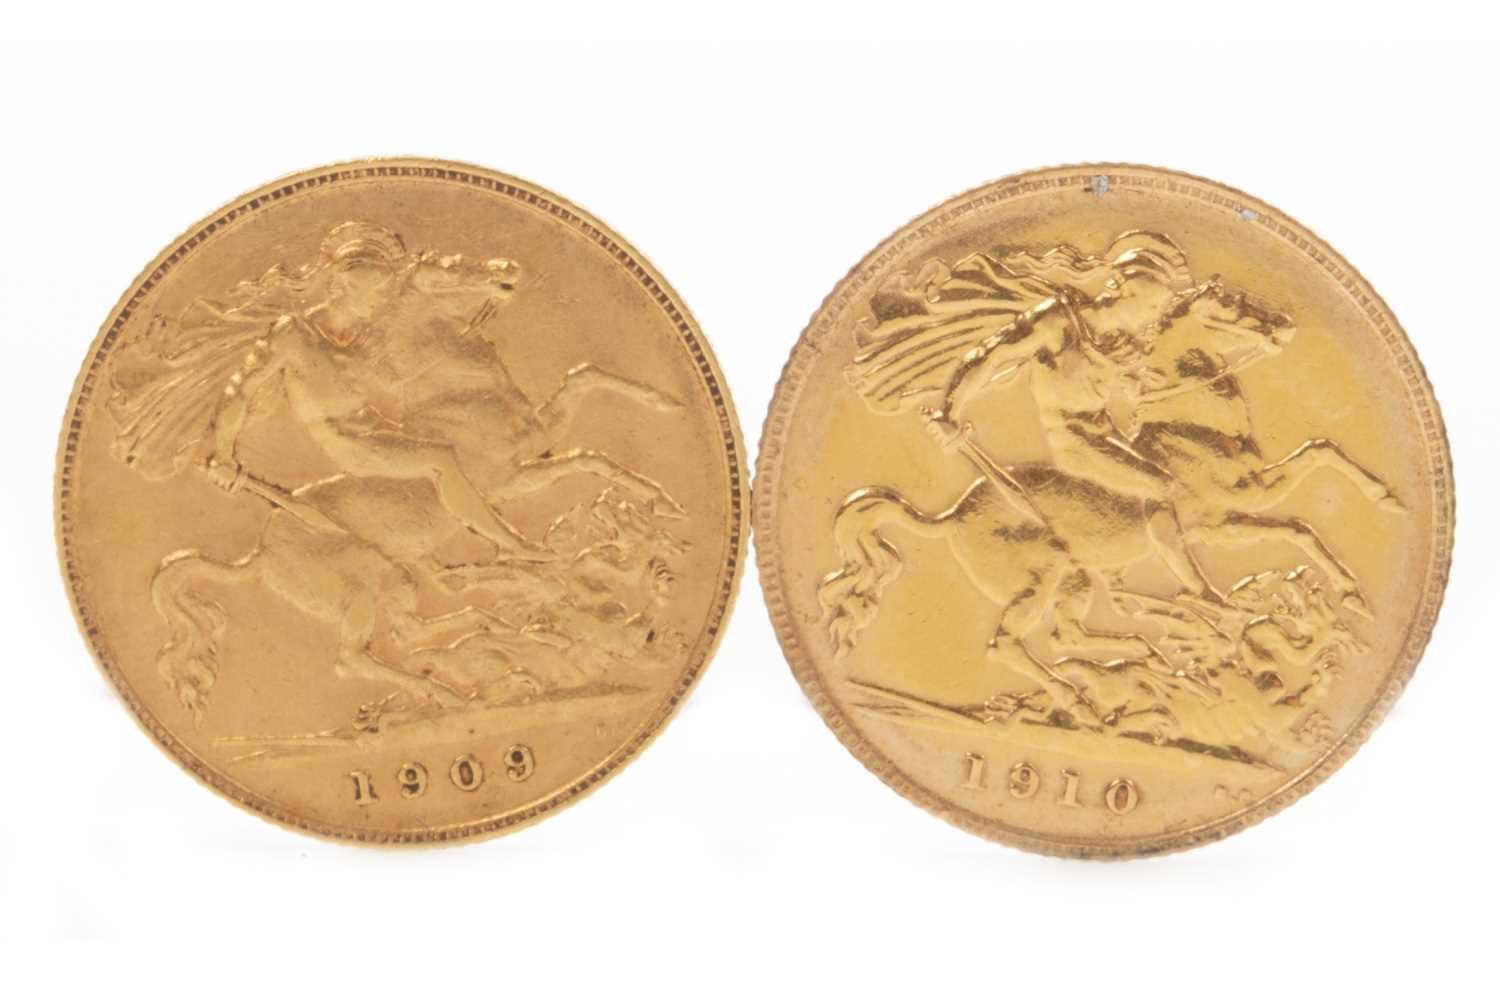 Lot 559 - TWO GOLD HALF SOVEREIGNS, 1909 AND 1910